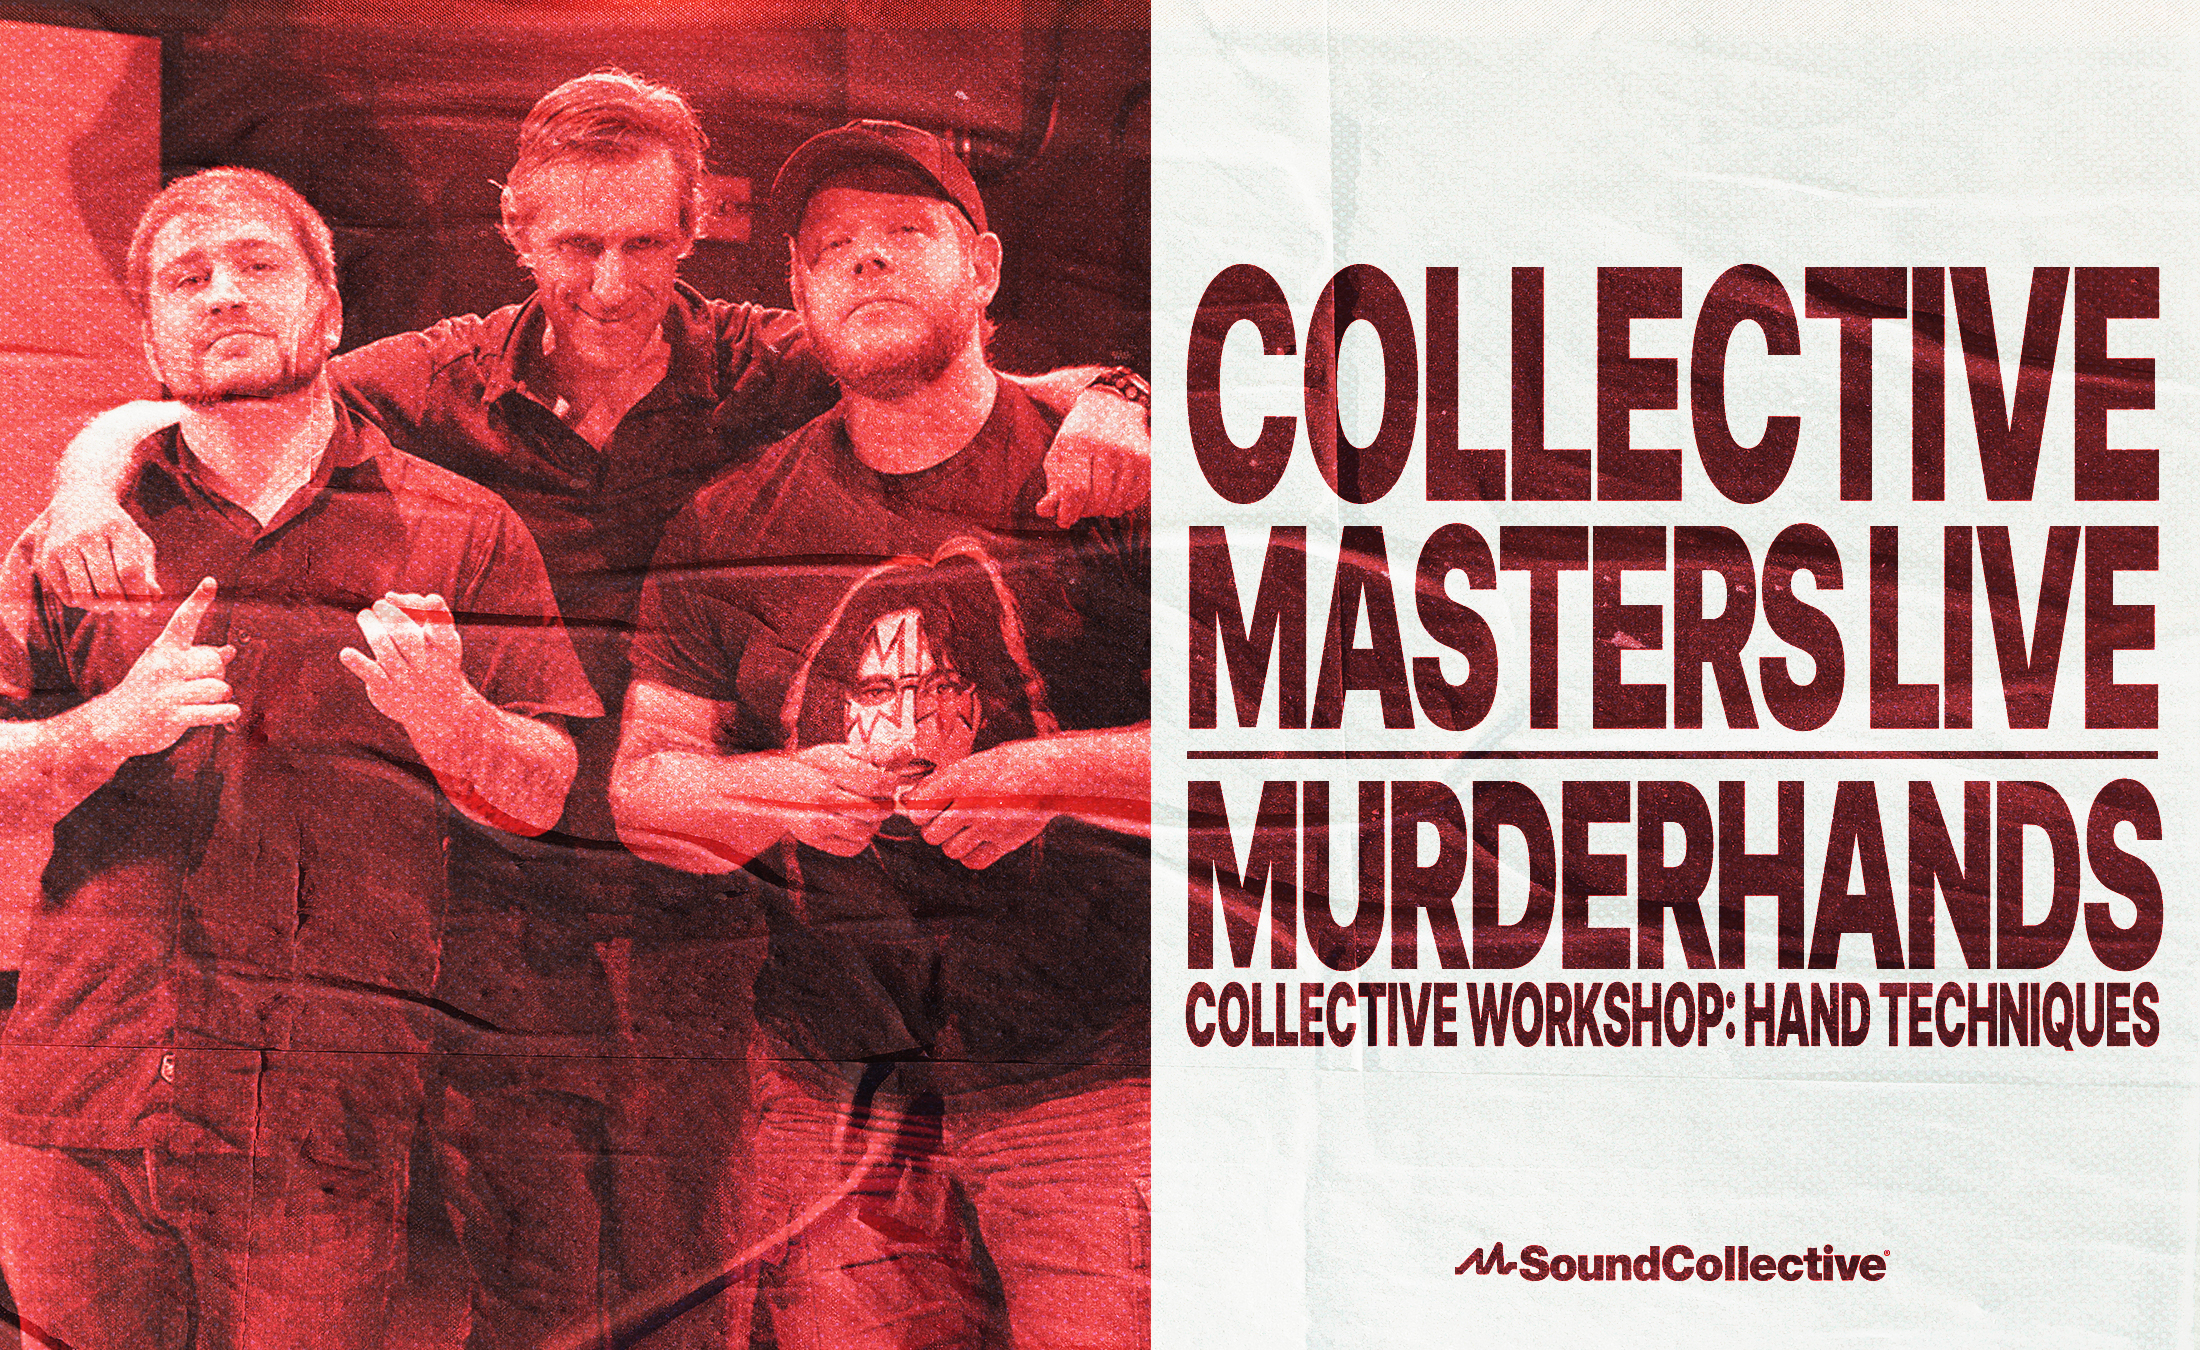 Collective Masters Live: Hand Techniques